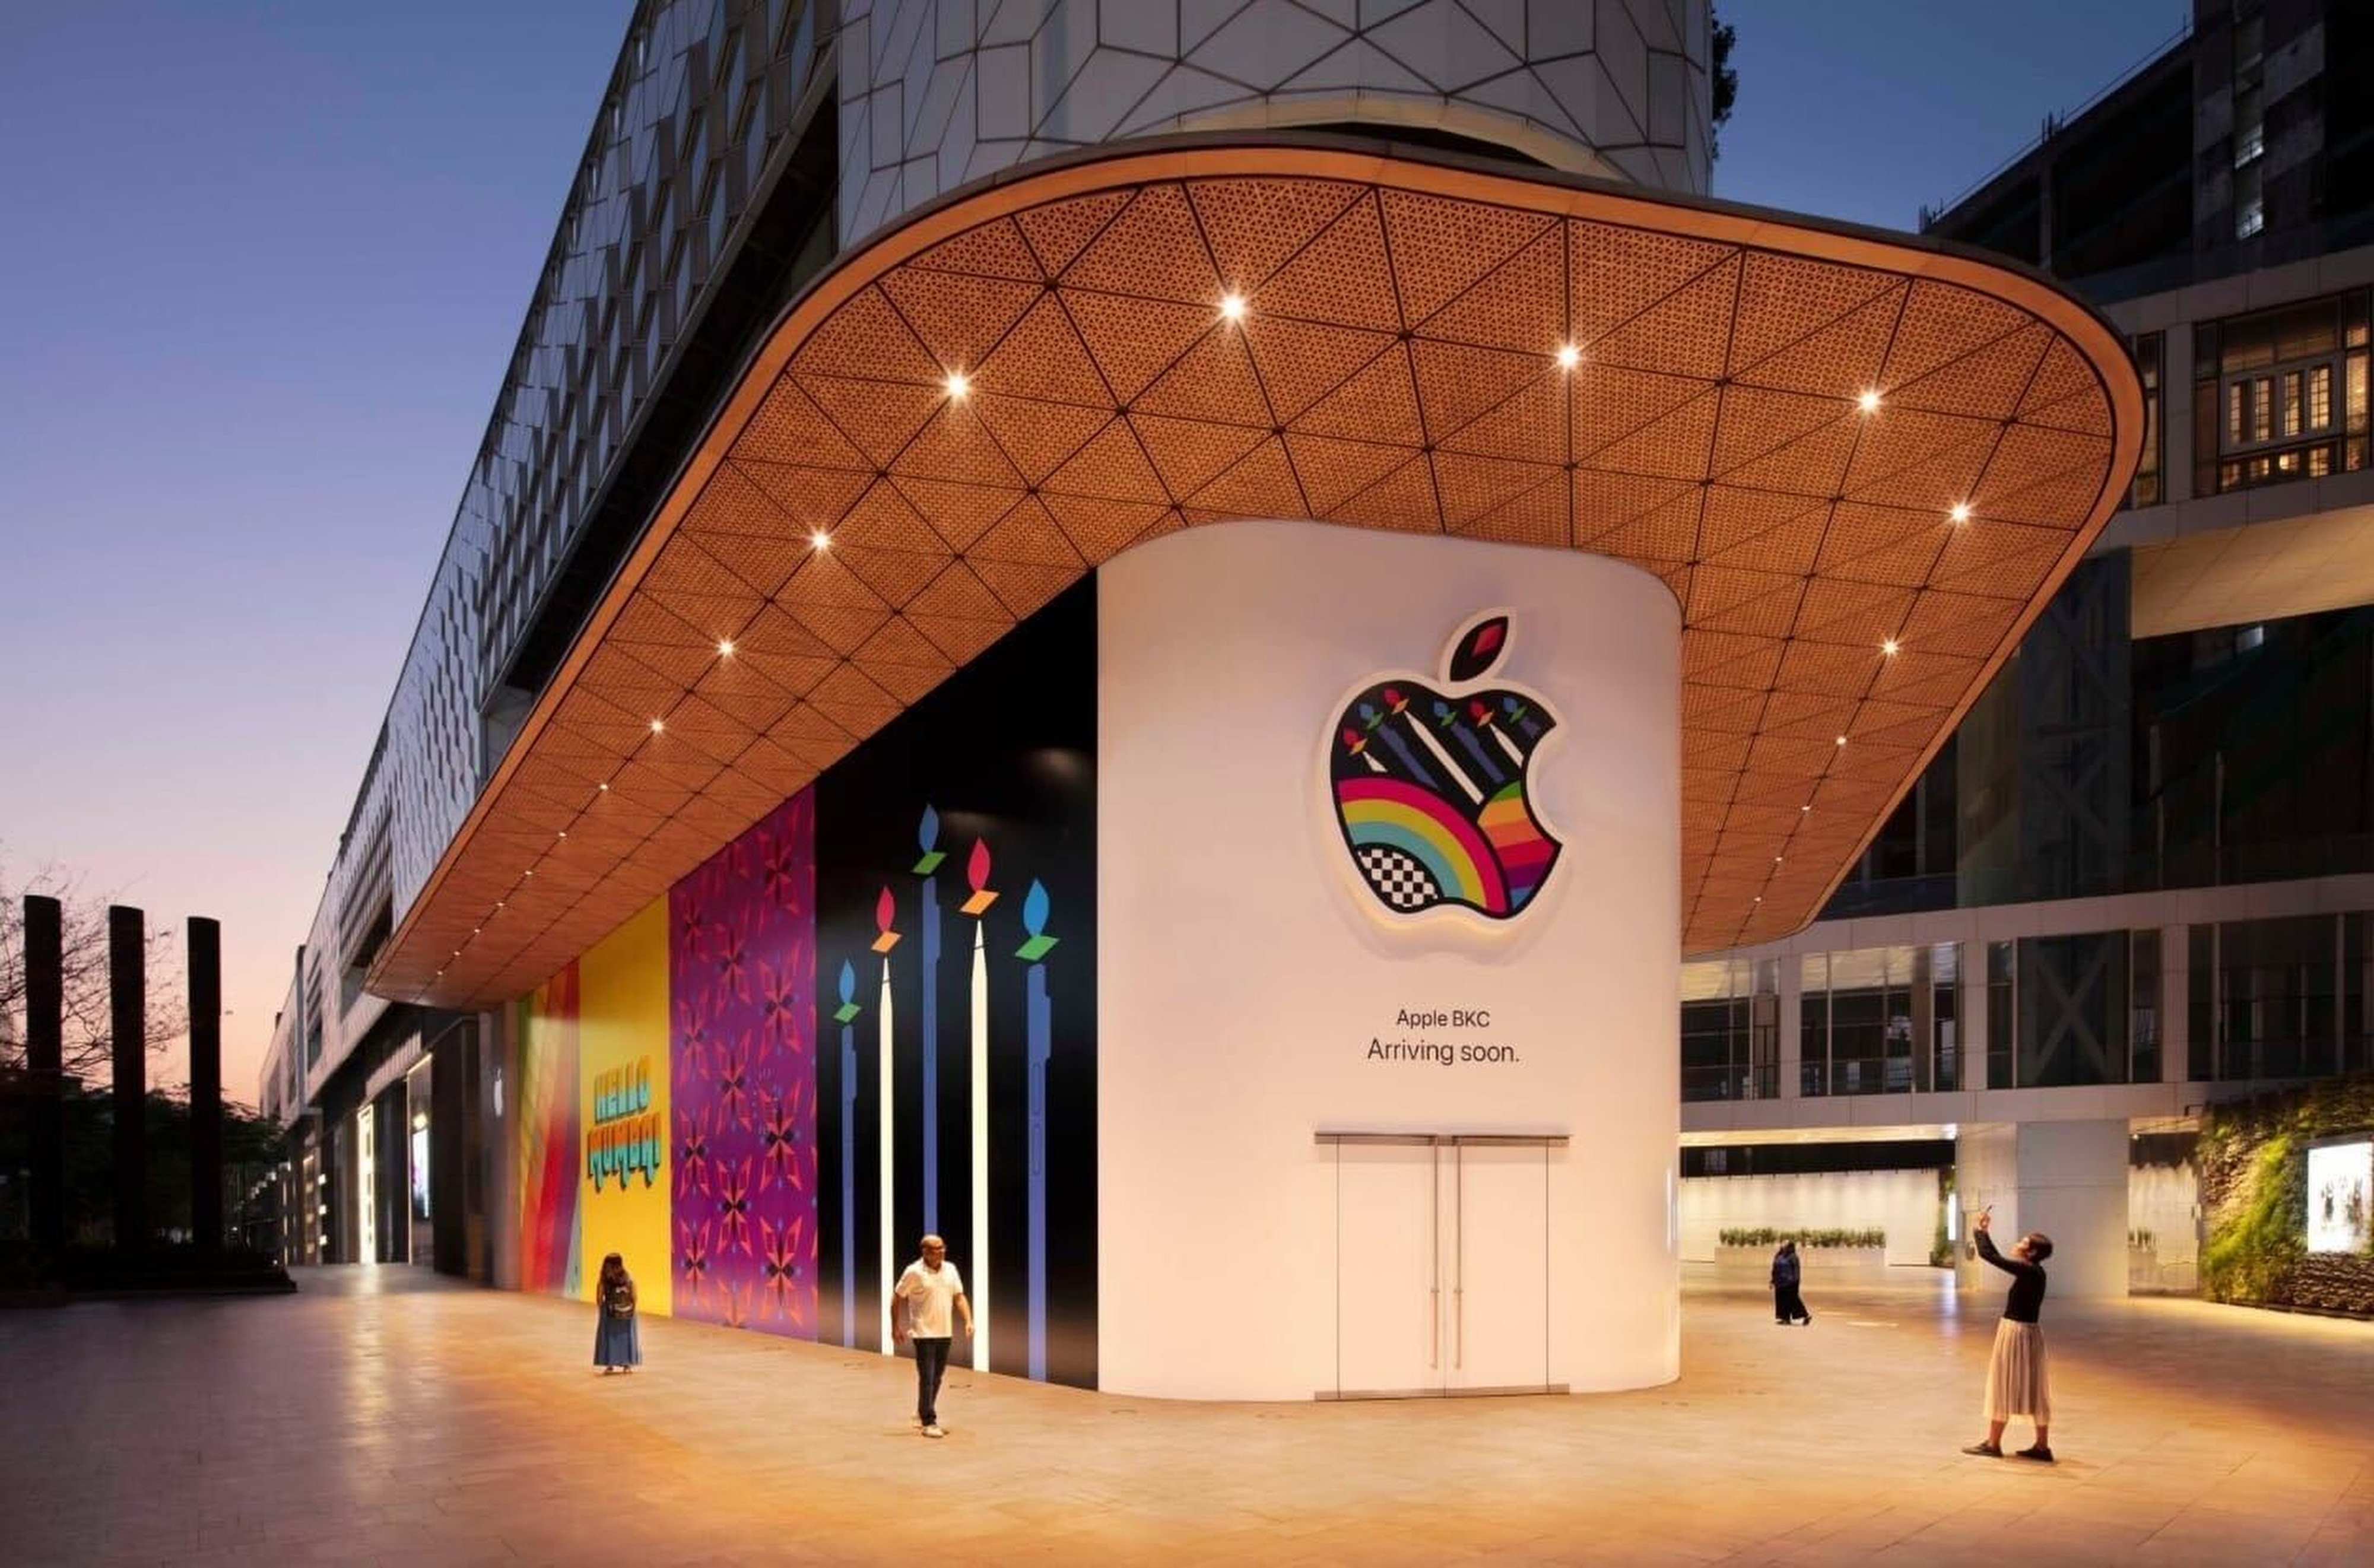 Apple is set to open its first retail store in India at the Jio World Drive shopping centre in Mumbai. Photo: Handout